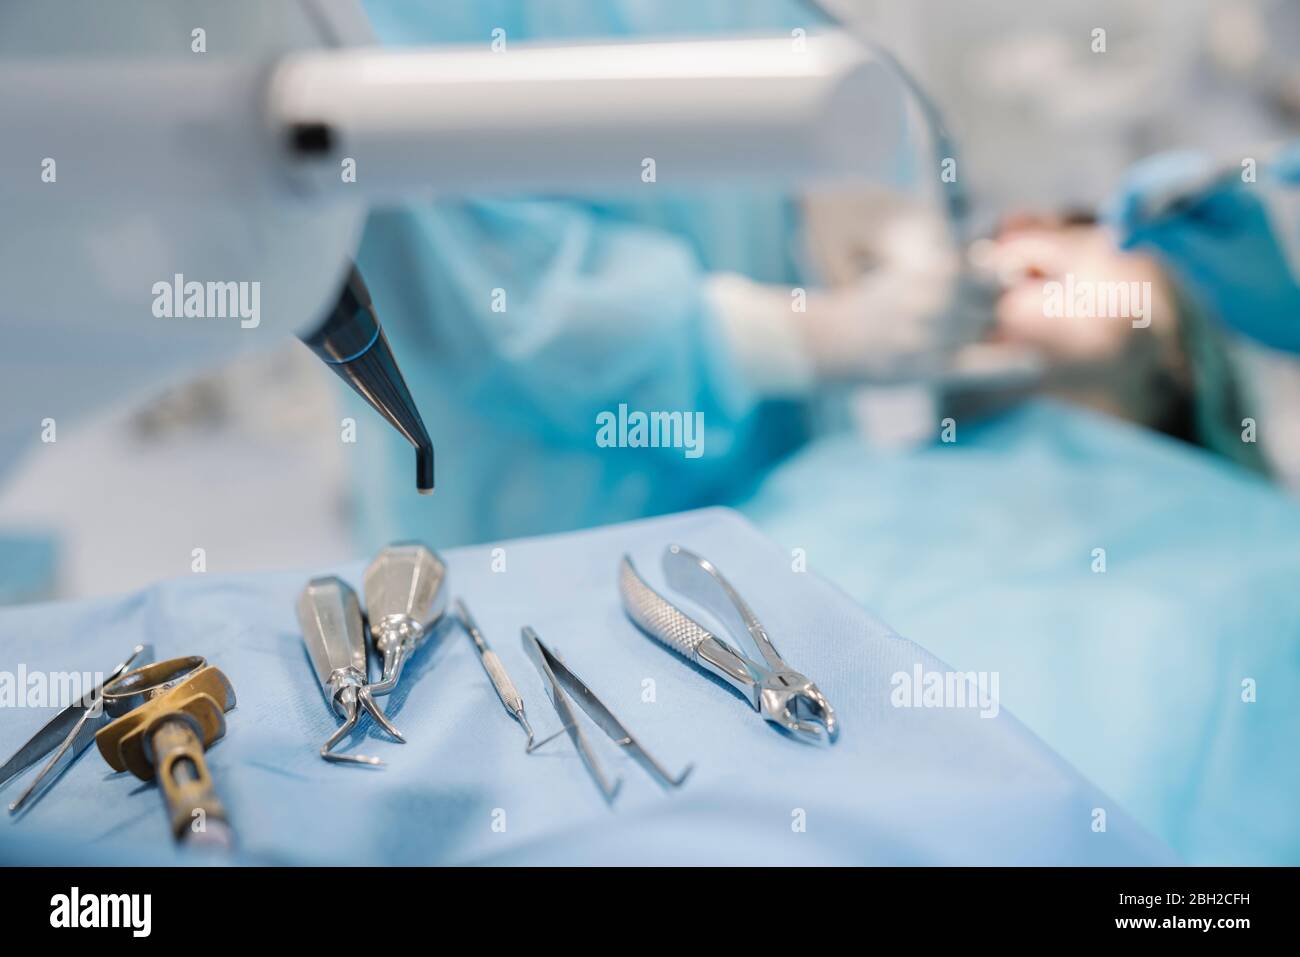 Dental intruments in dental clinic, used at treatment, focus on foreground Stock Photo